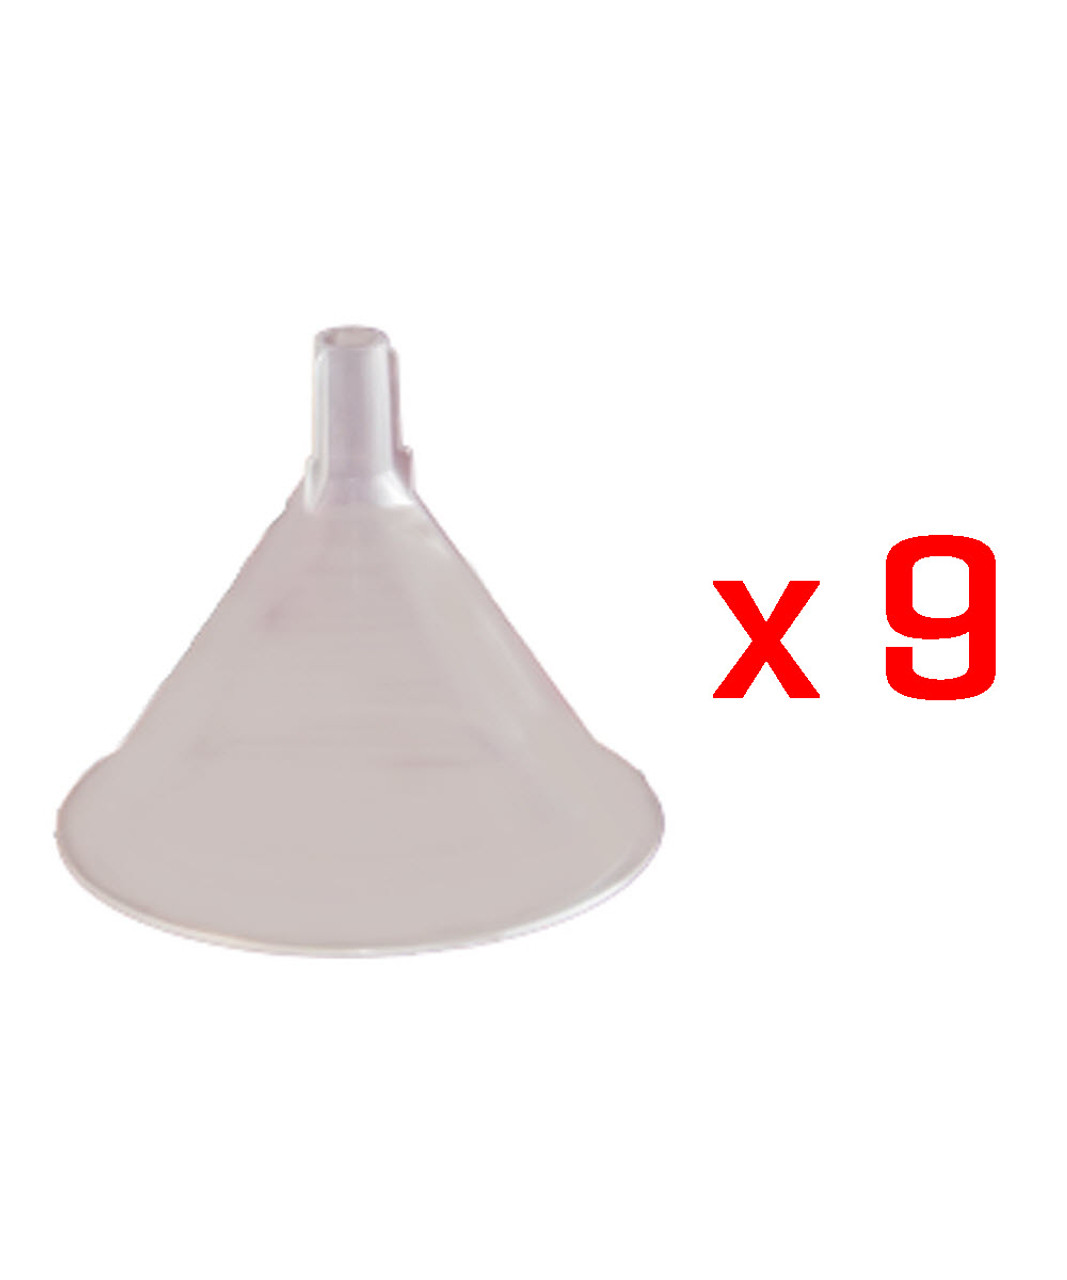 9- Small Funnels for filling ink bottles or refillable ink cartridges EPSON Stylus Pro 3800 3880 7890 9890 printers